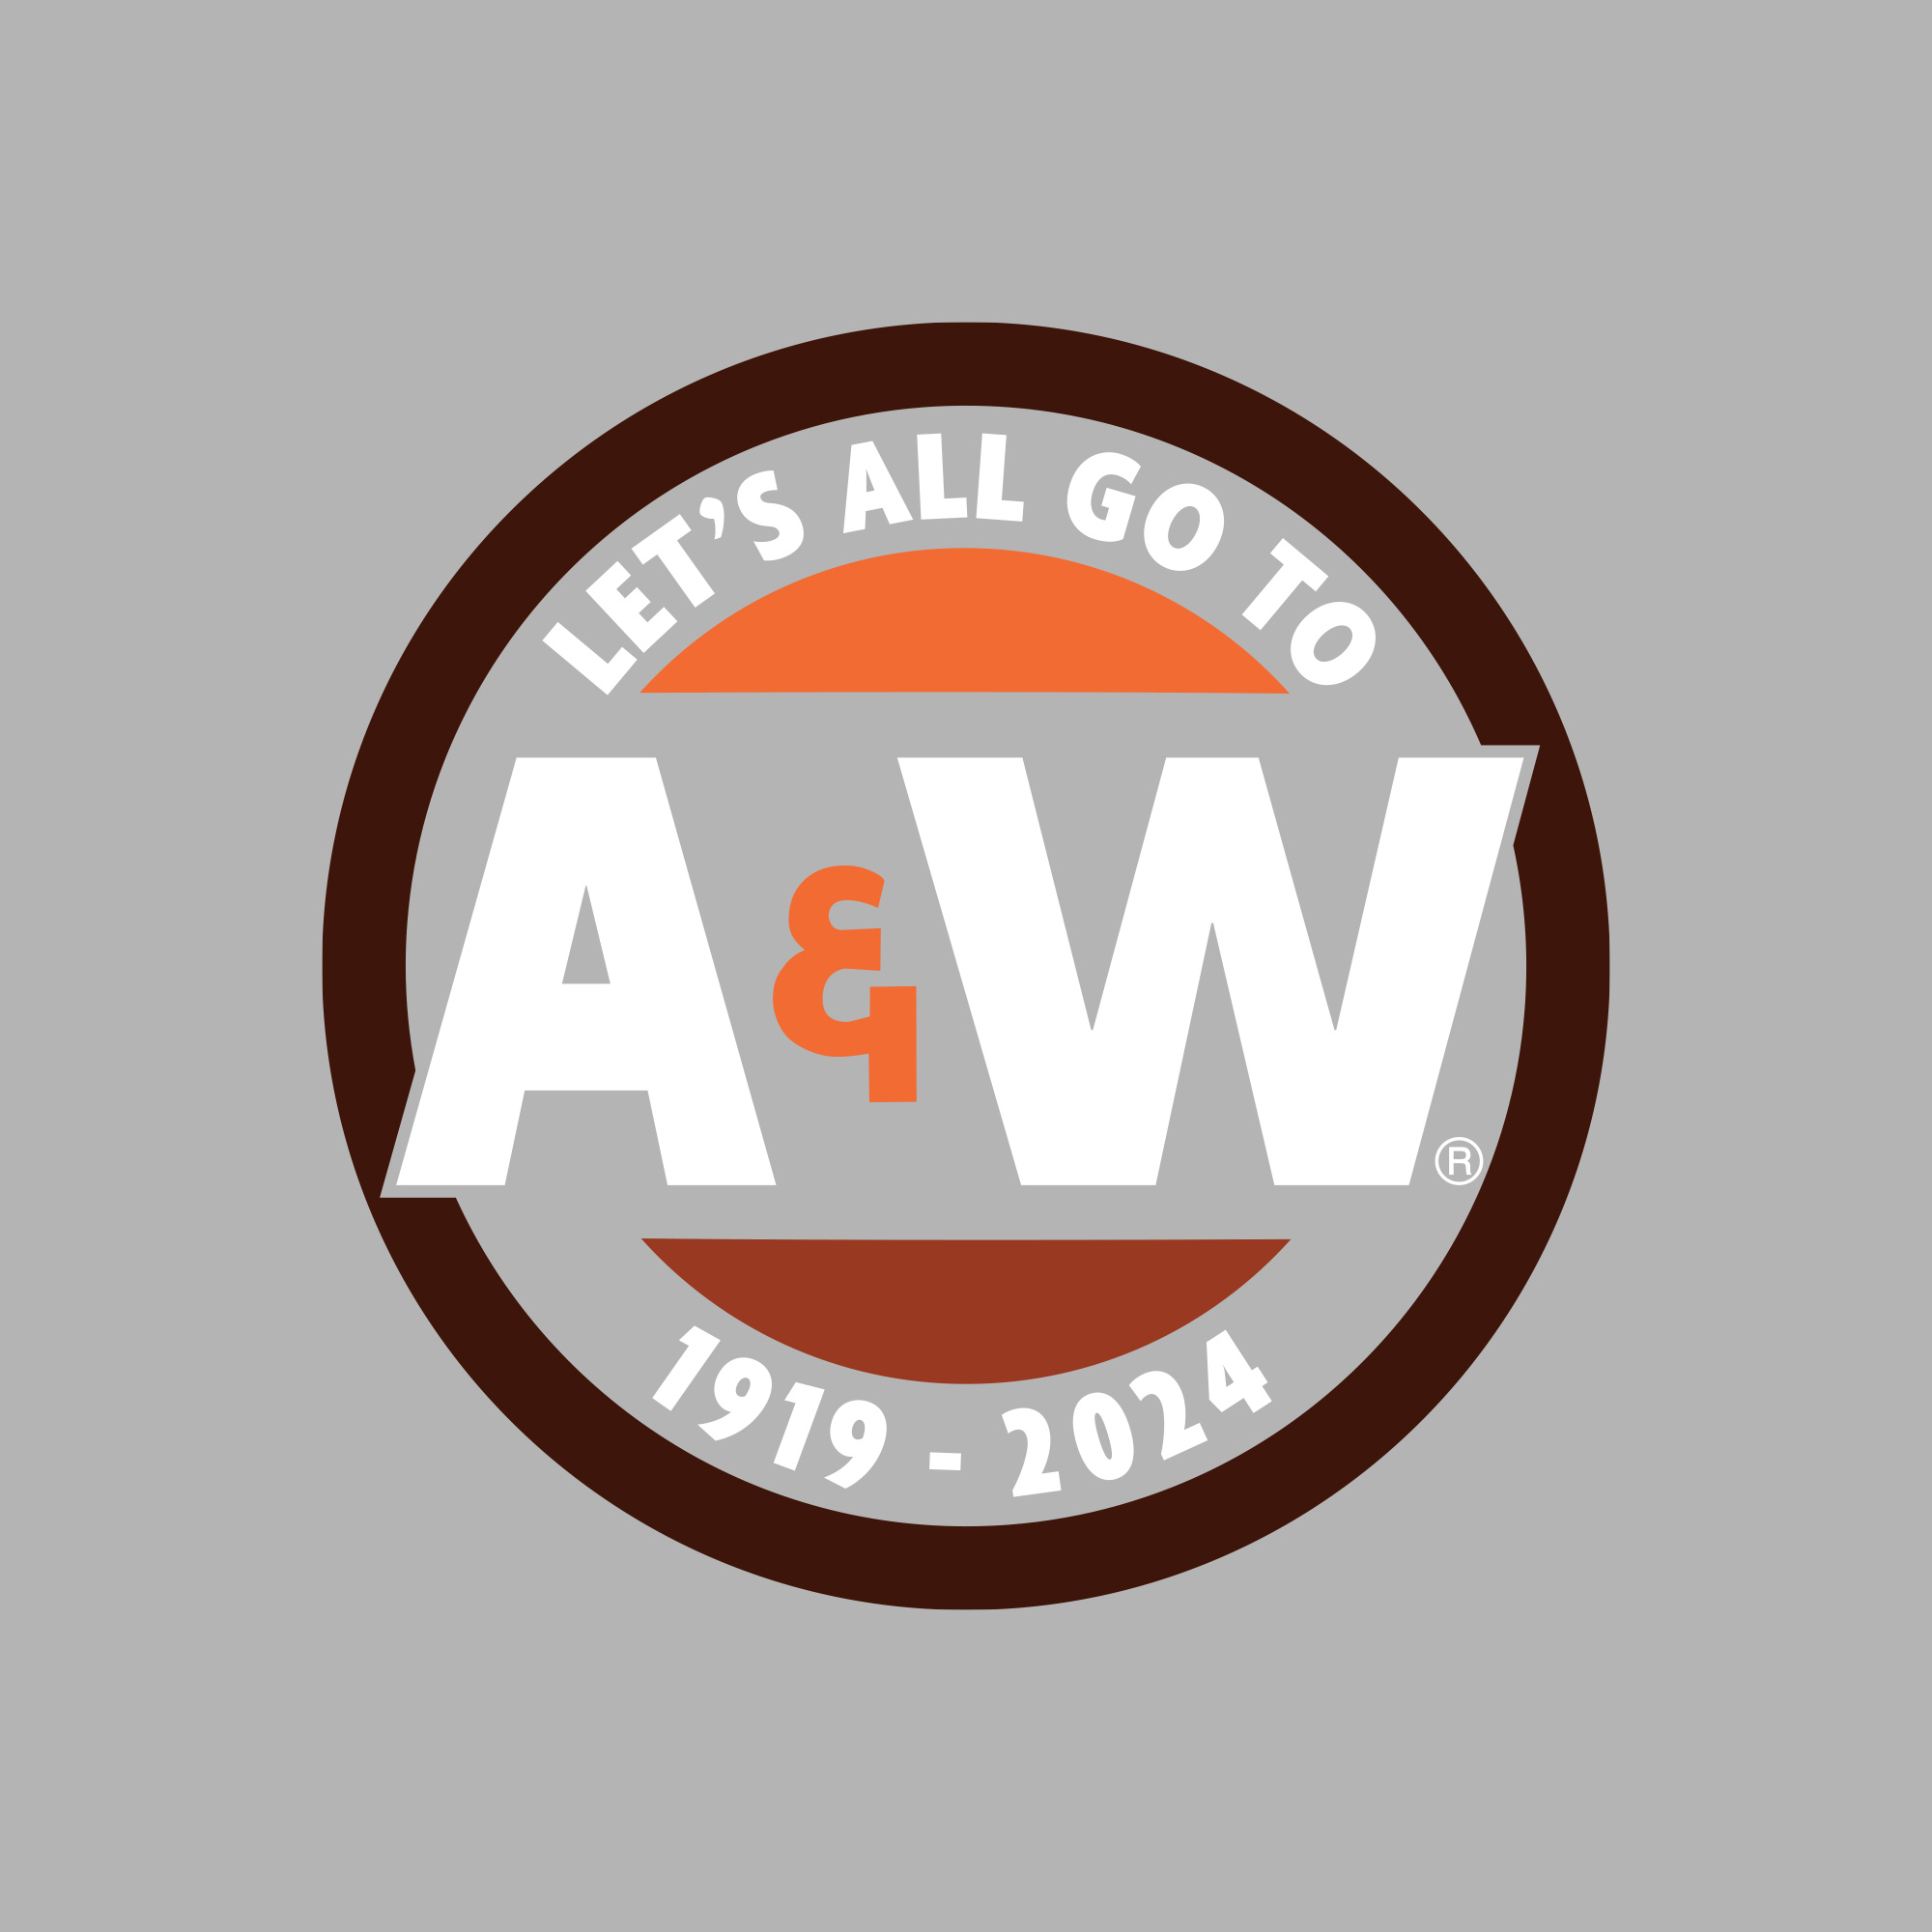 Let's All Go To A&W 2024 logo